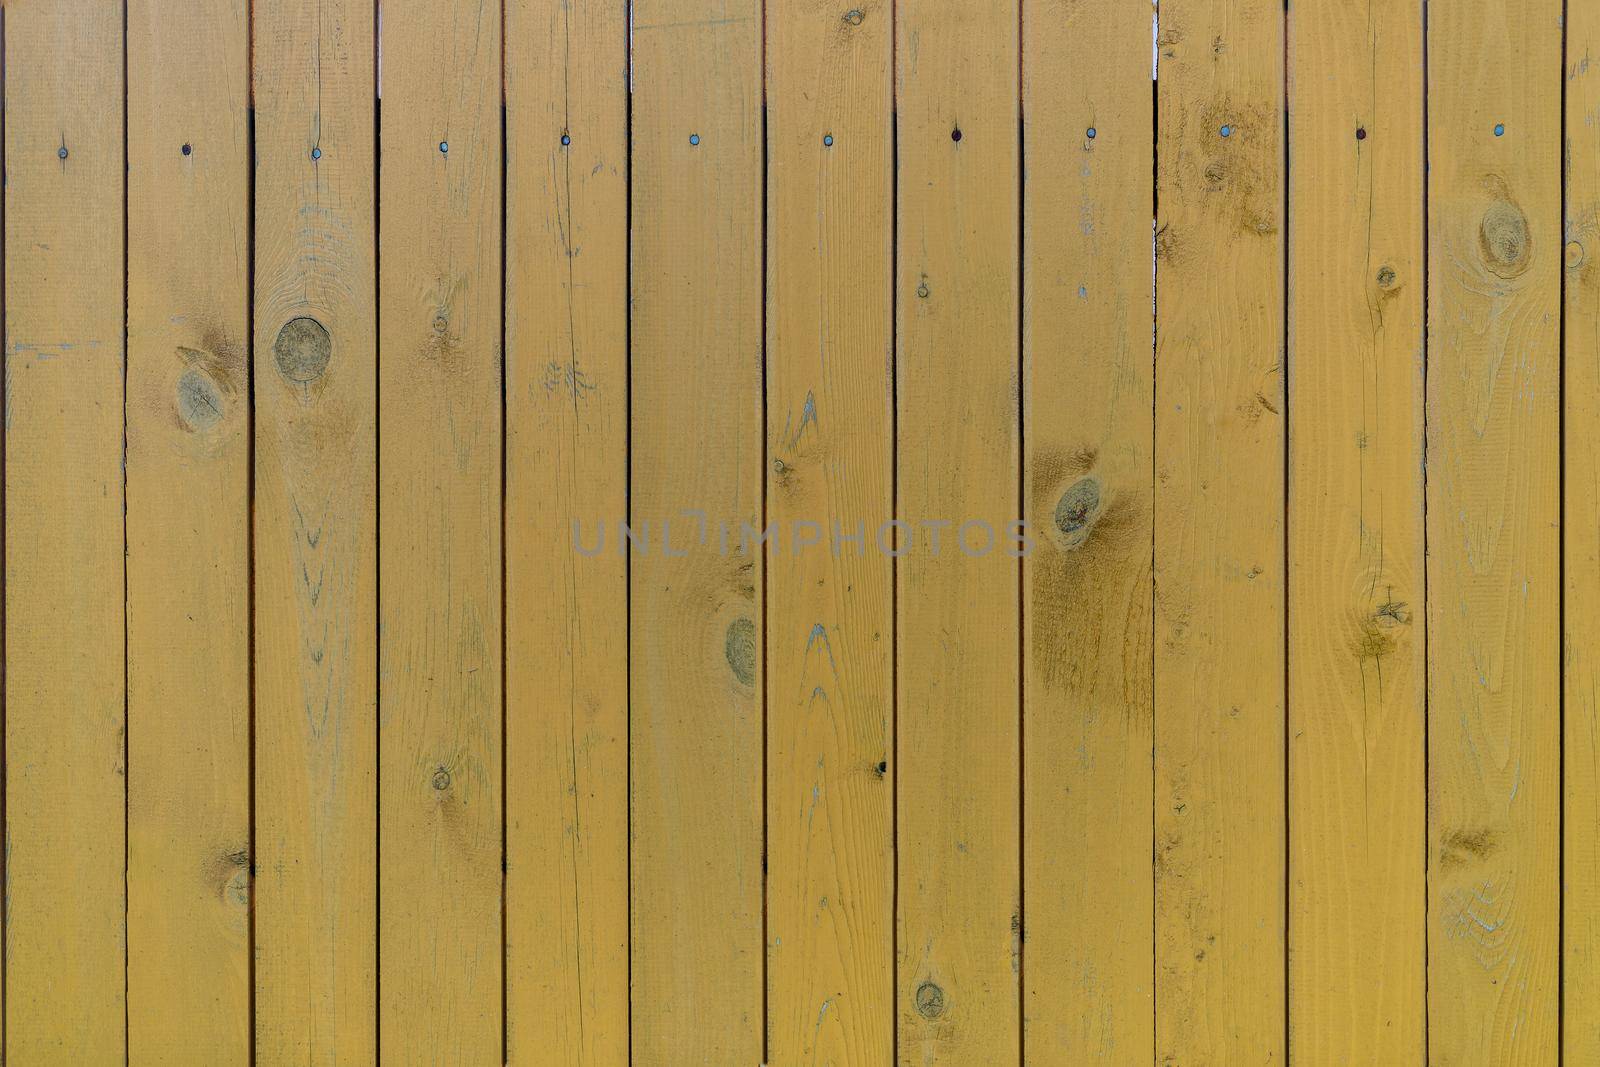 Background textures of old wooden boards used for the background Background textures of old wooden boards used for background and drawing images